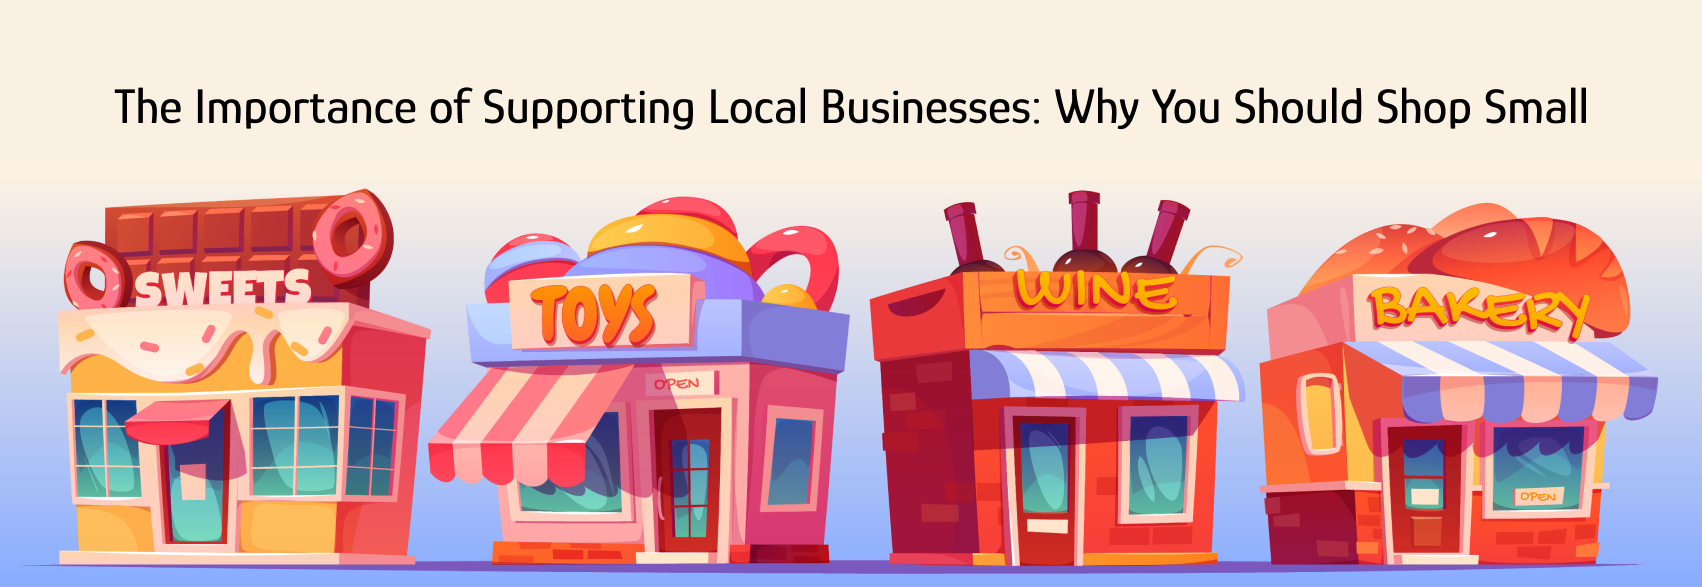 The Importance of Supporting Local Businesses: Why You Should Shop Small